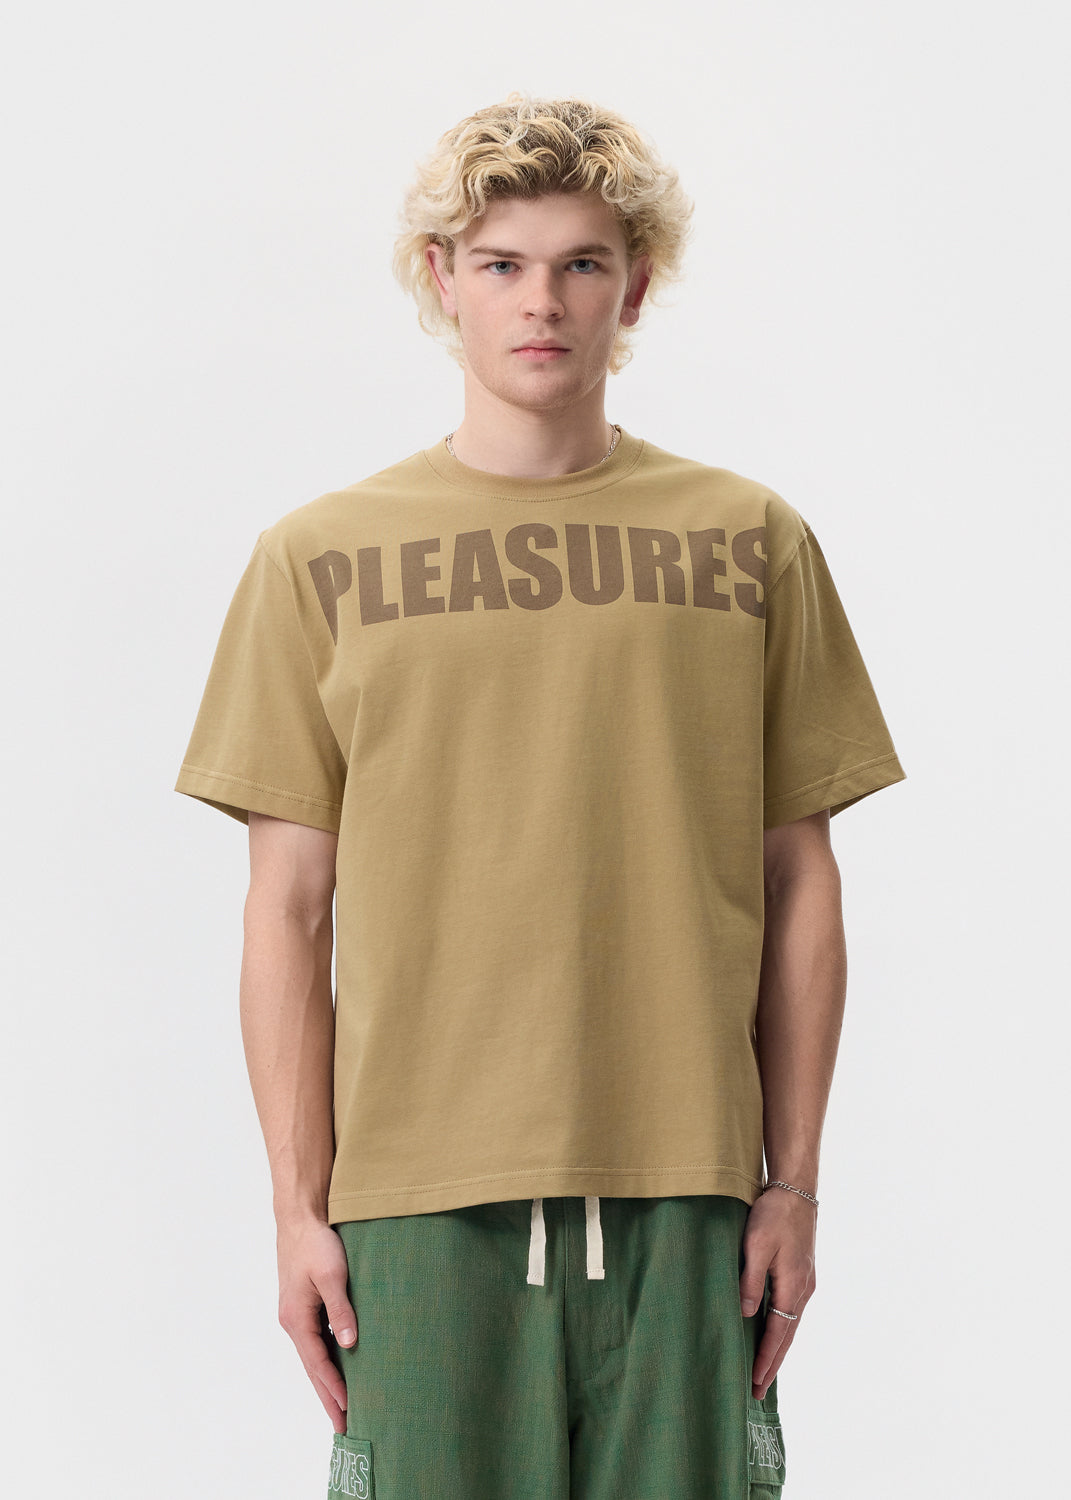 Pleasures - Brown Expand Heavyweight Shirt | 1032 SPACE